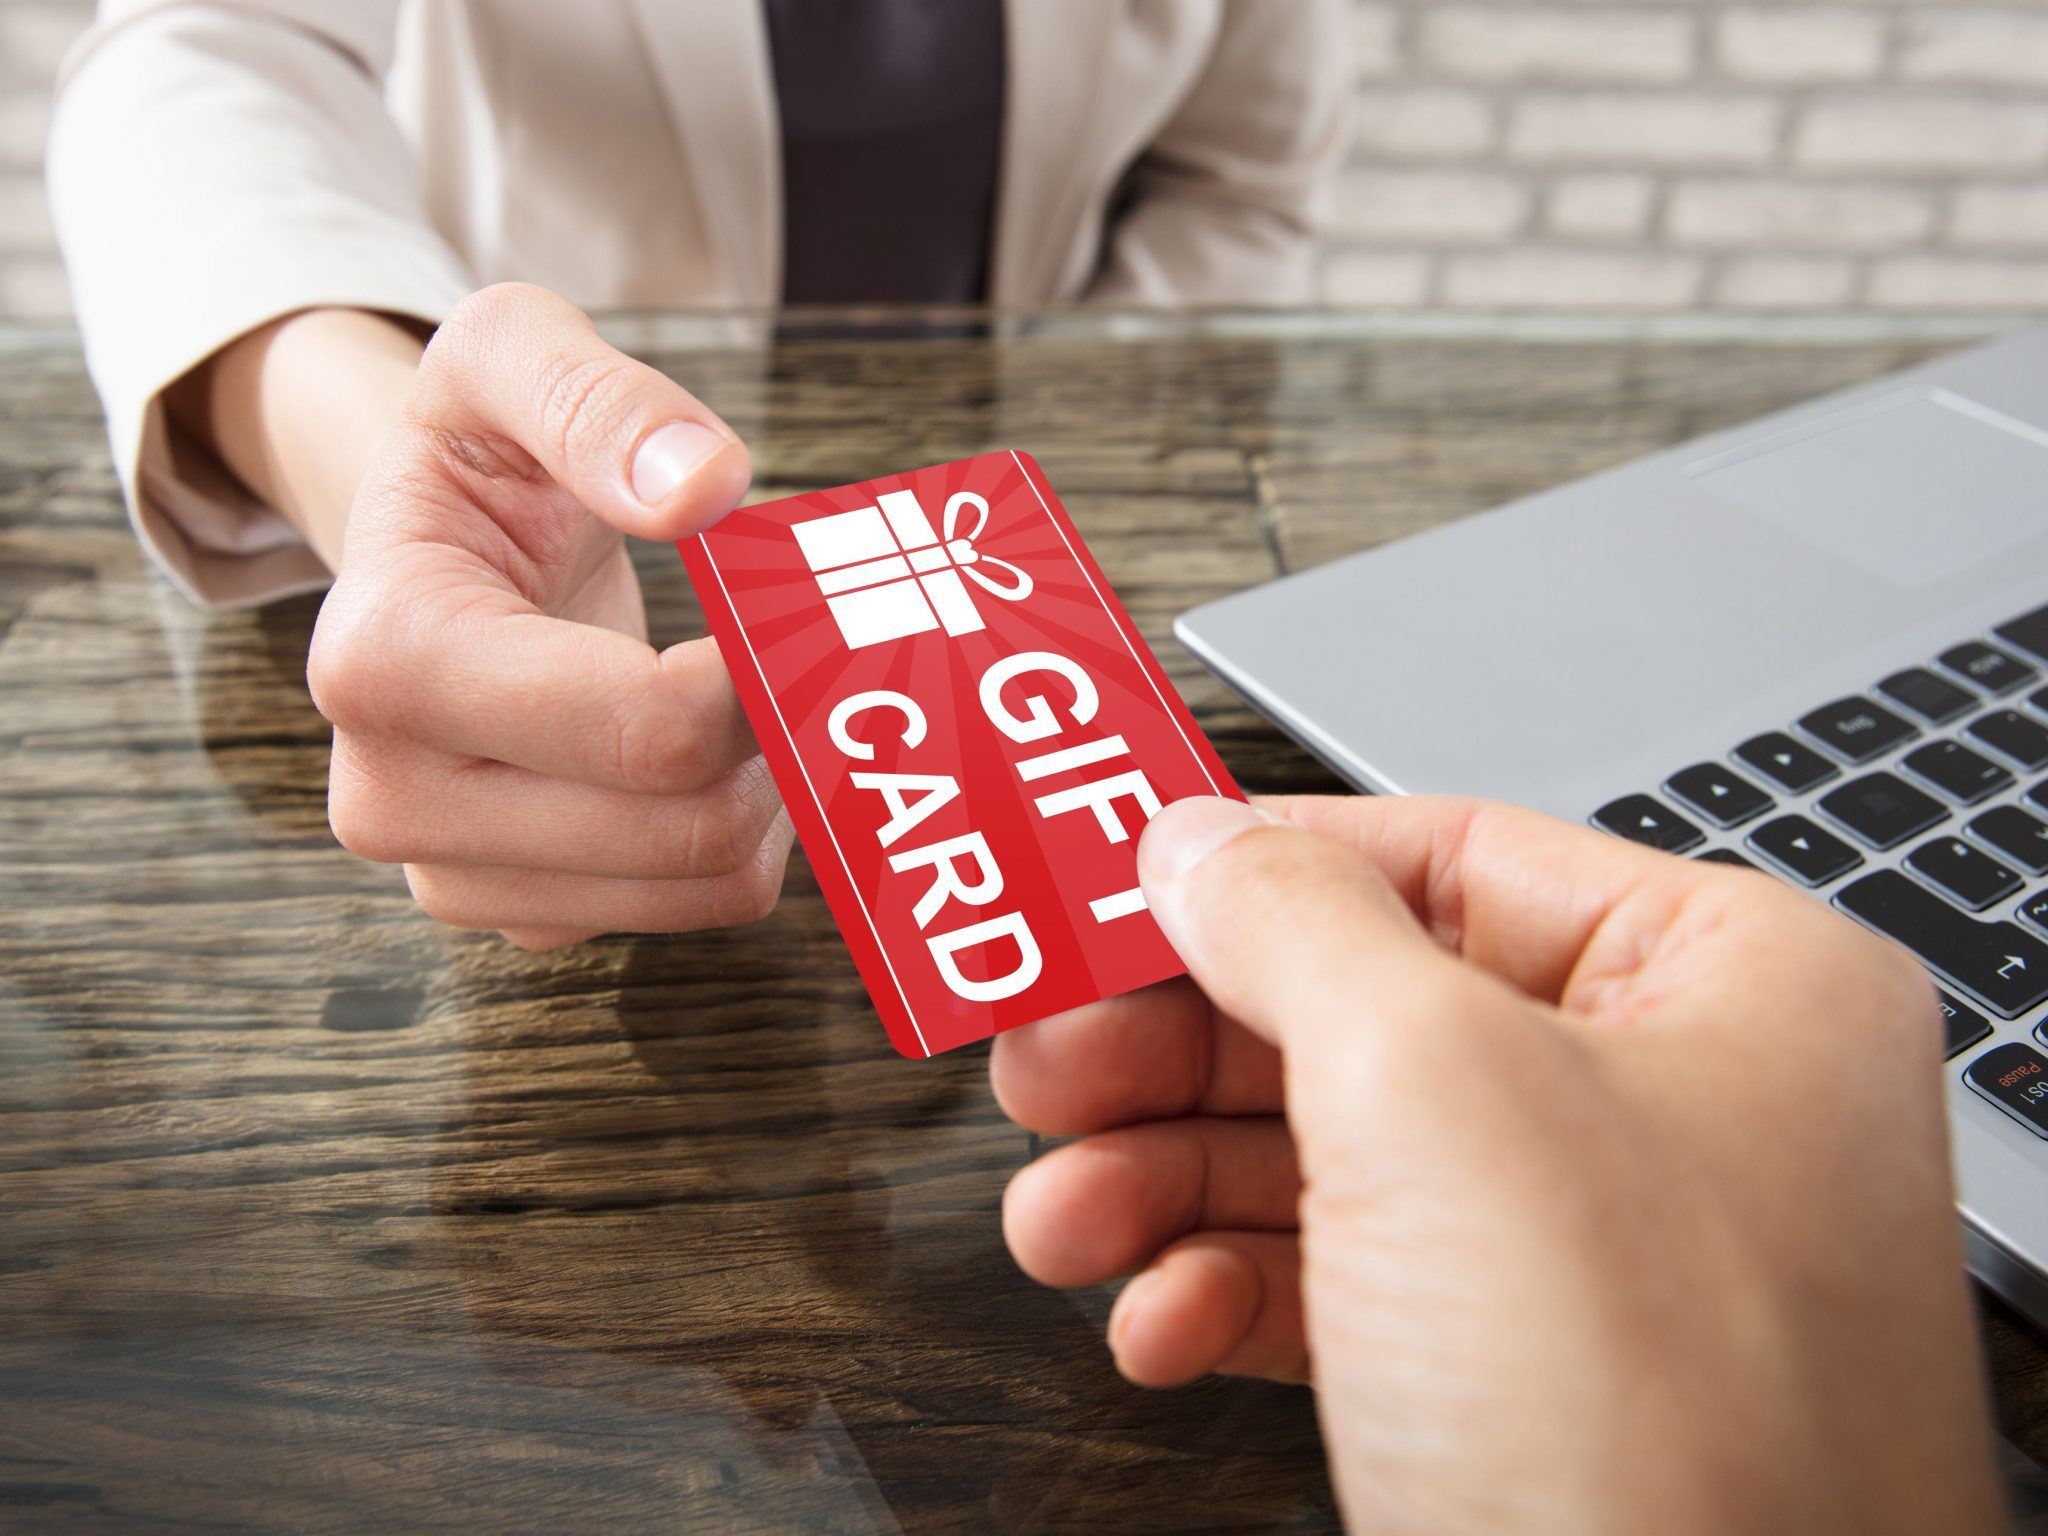 Are Gift Cards Taxable to Employees?